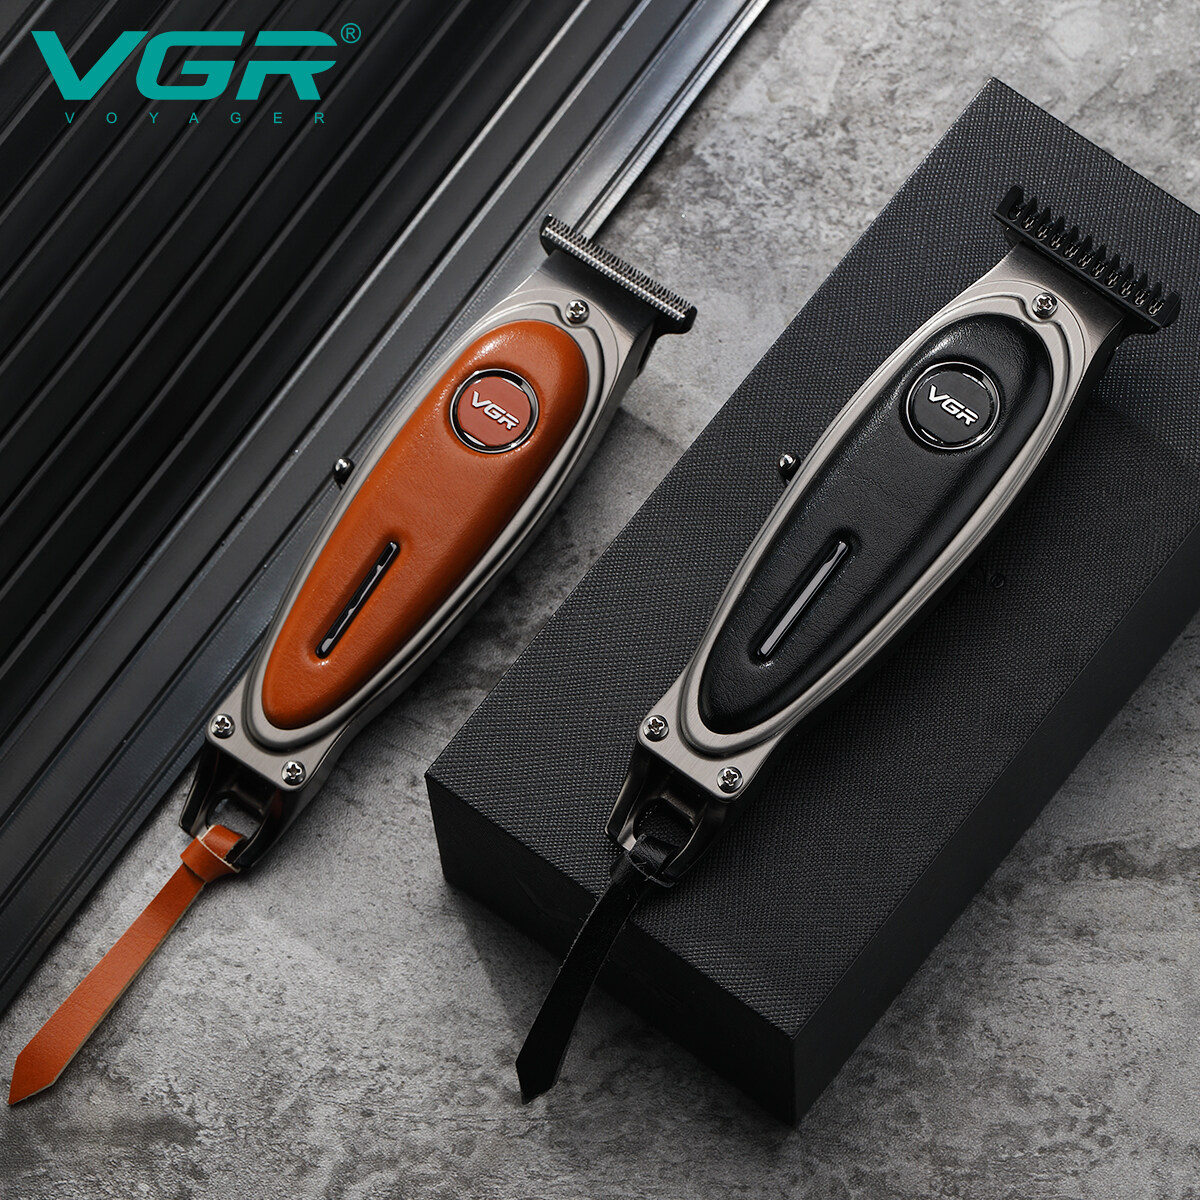 hair trimmer suppliers, customized hair trimmer, china hair trimmer manufacturer, hair clipper suppliers, wholesale leather material trimmer